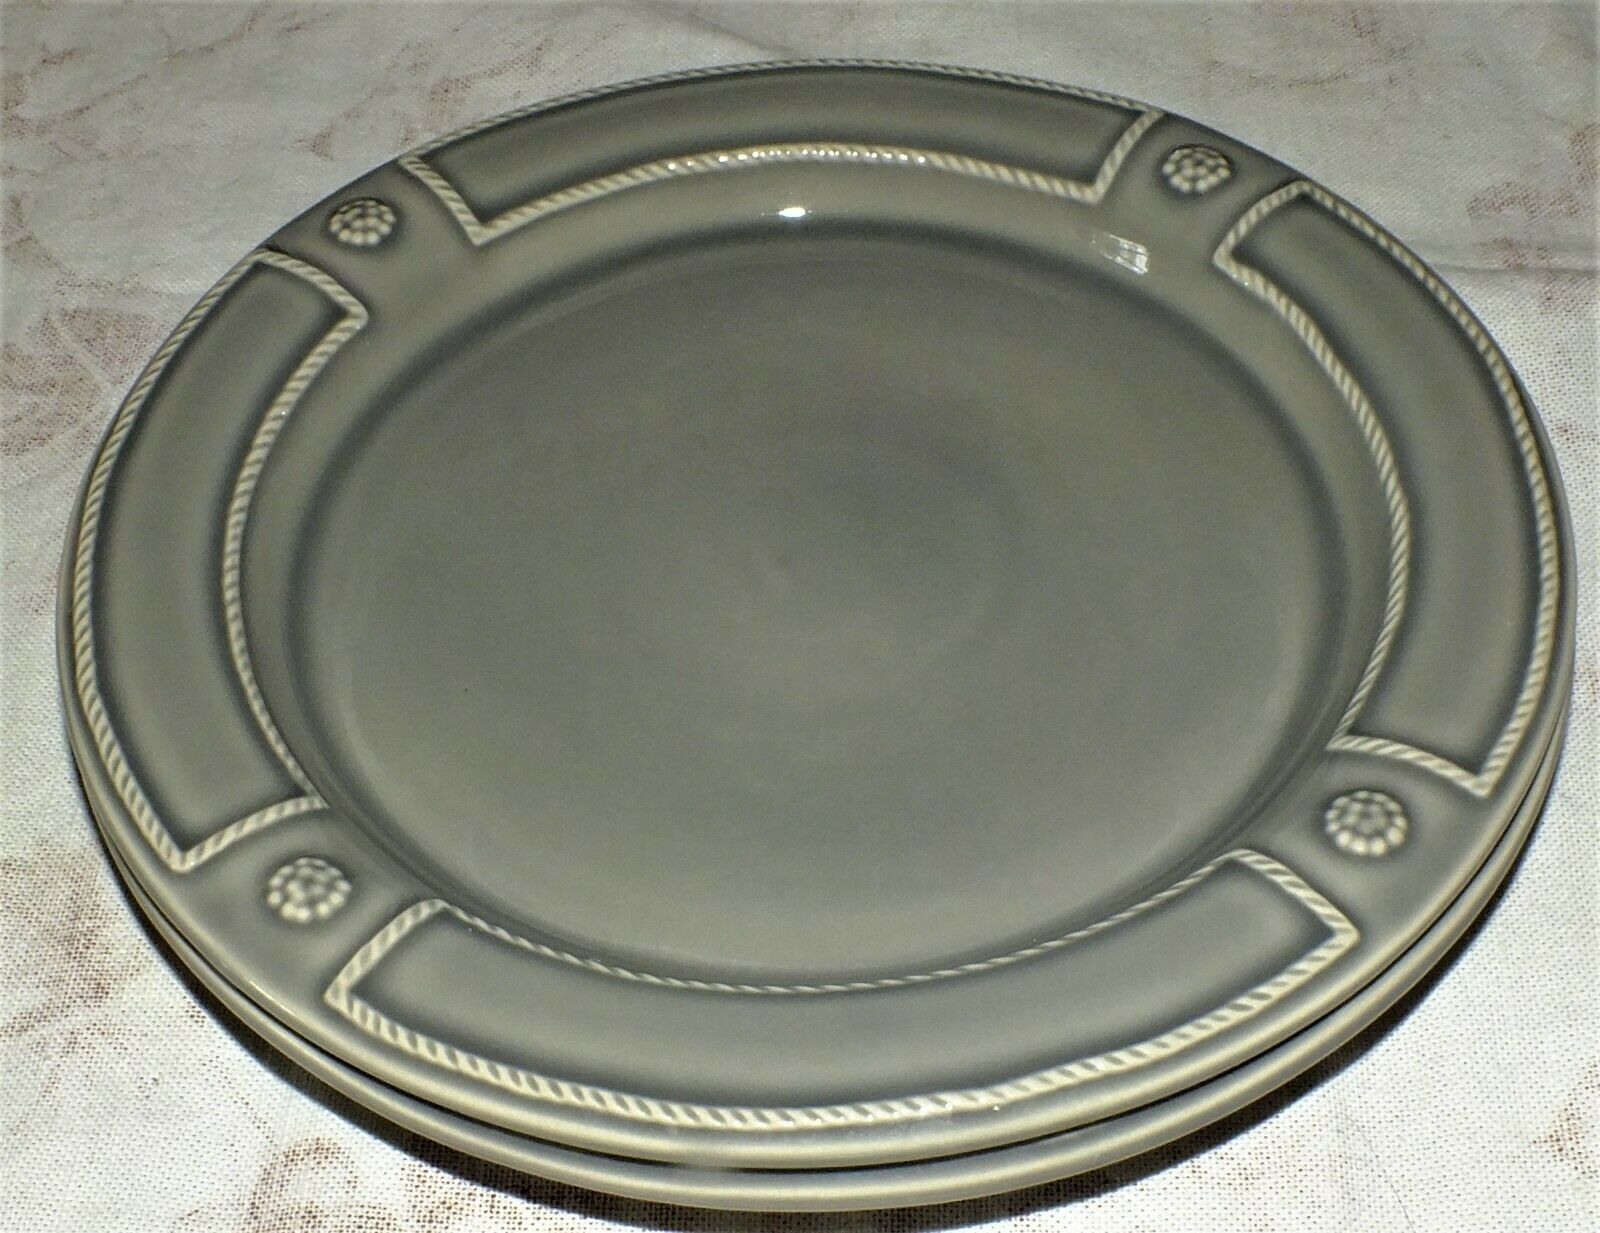 JULISKA BERRY AND THREAD FRENCH PANEL stone gray grey SALAD PLATE (S)  NEW